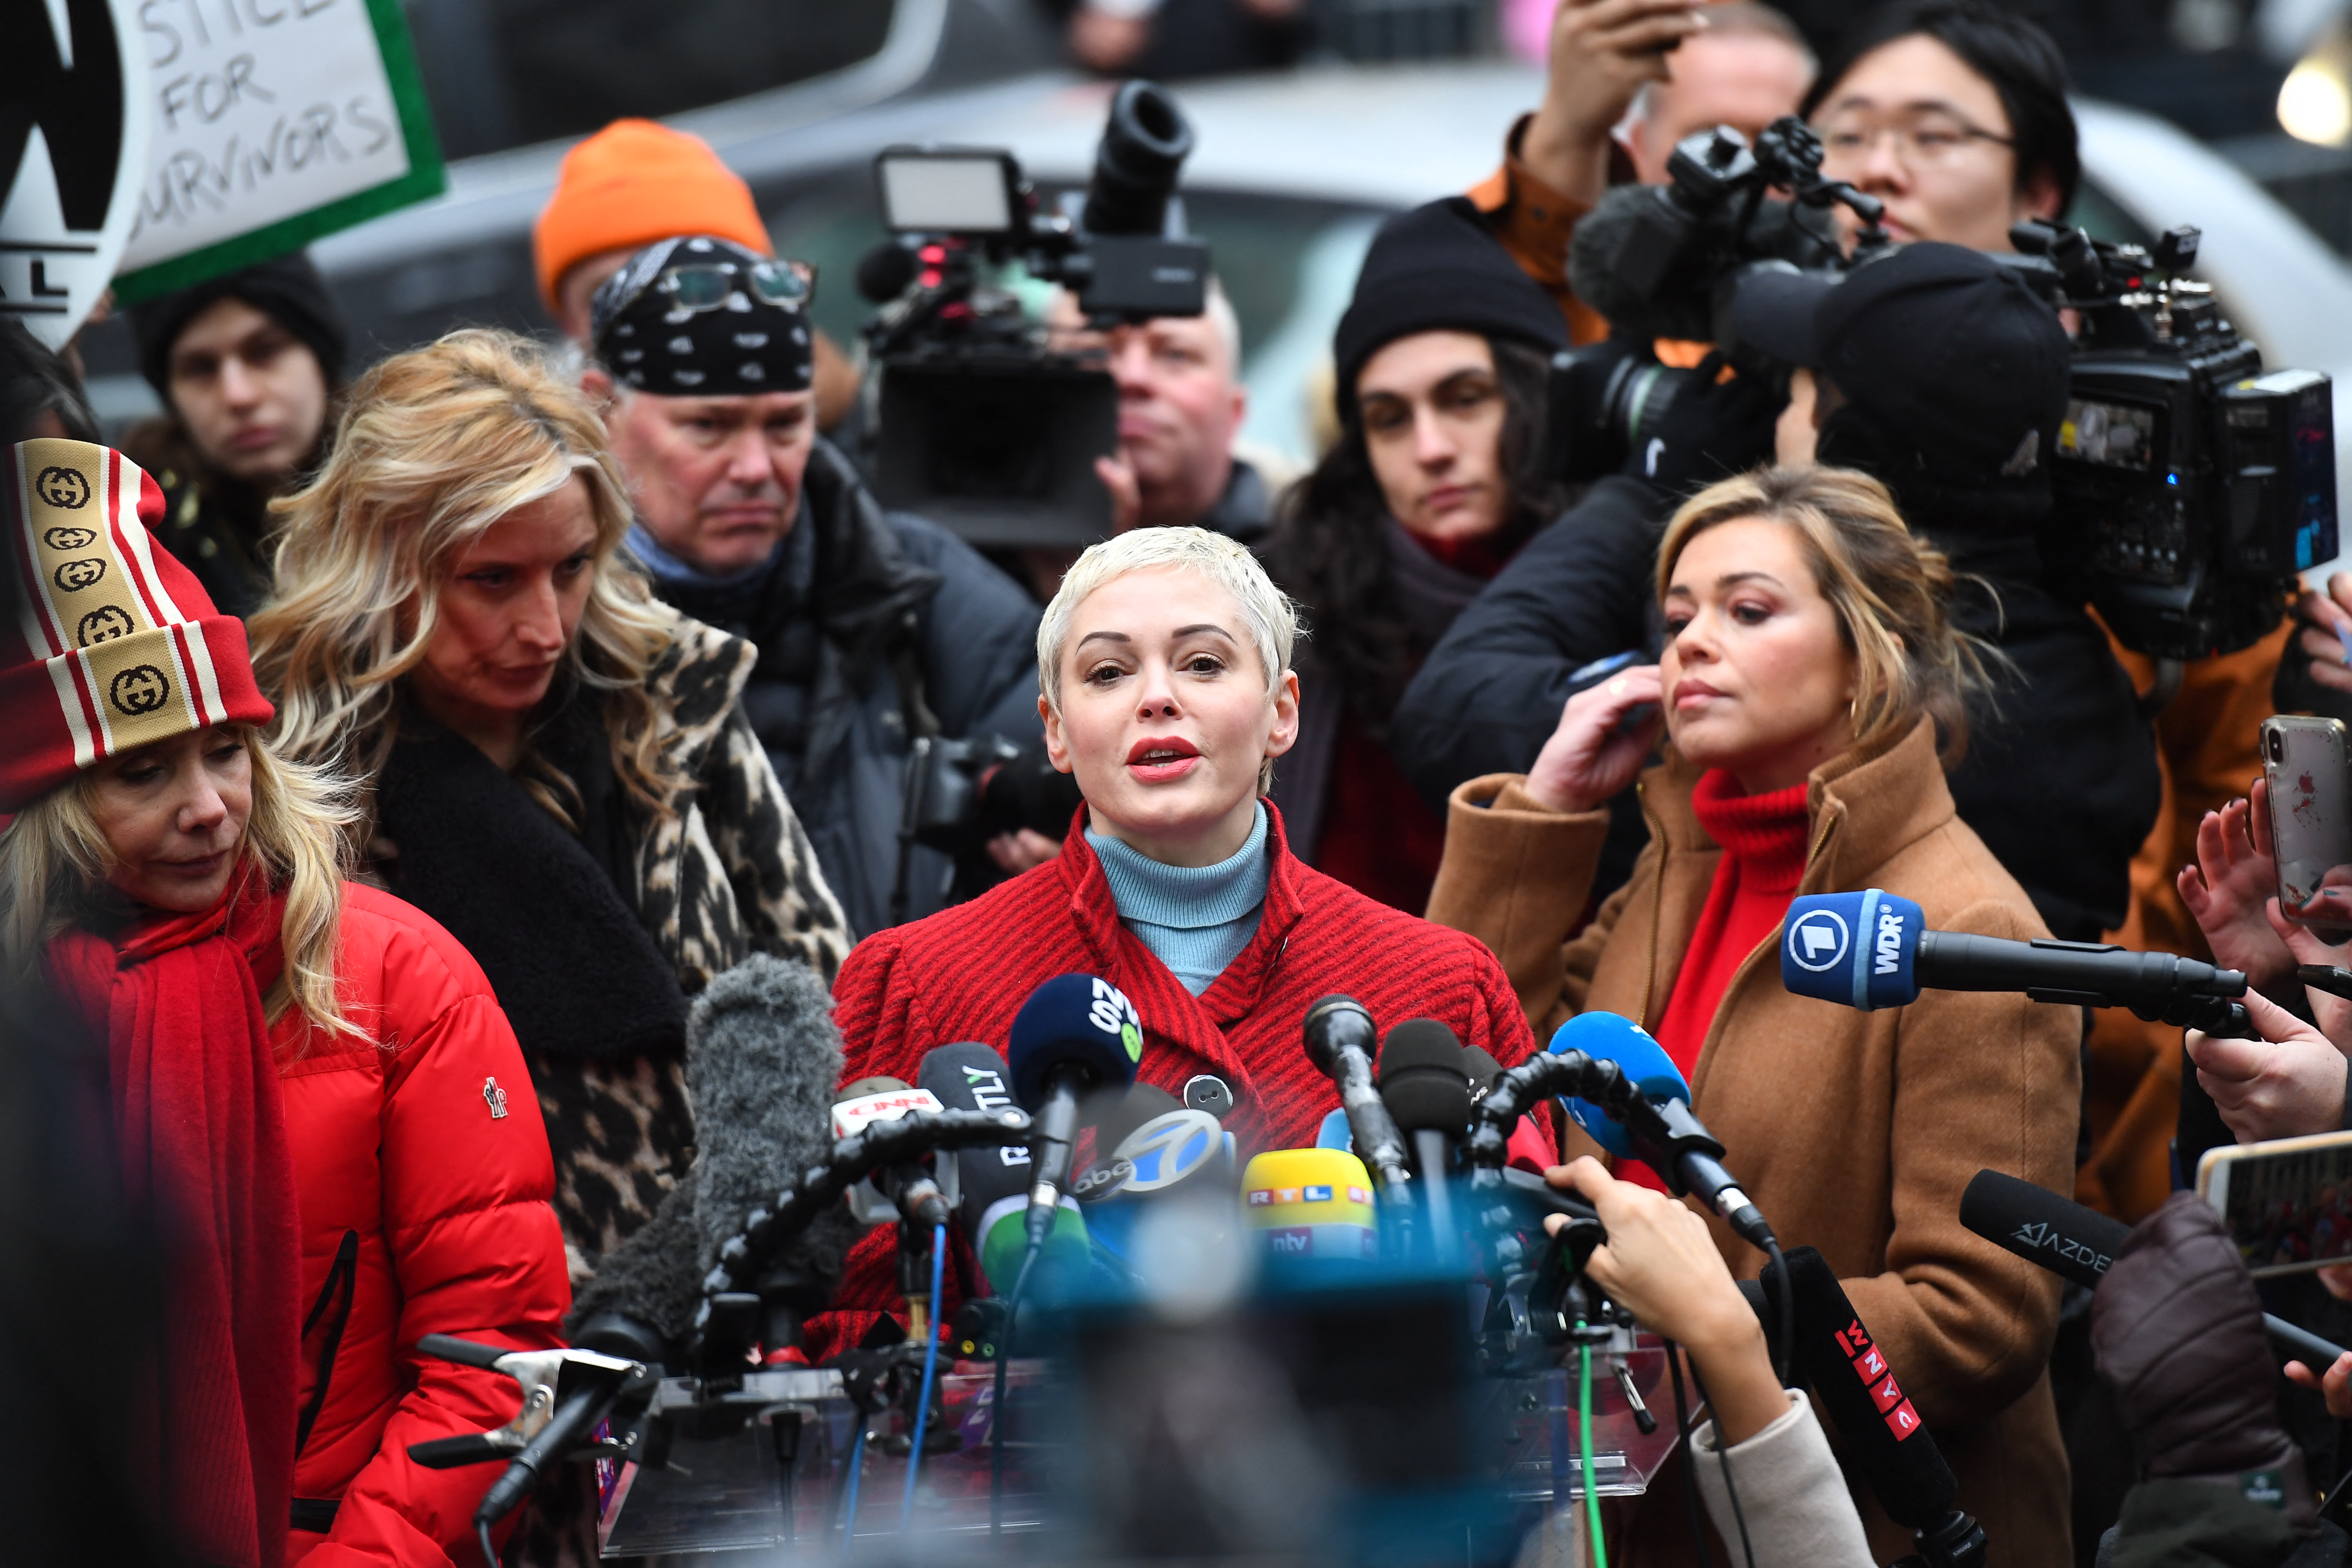 McGowan speaks during a press conference, after Harvey Weinstein arrived on the first day of his criminal trial on charges of rape and sexual assault at State Supreme Court in Manhattan, New York City, January 6, 2020. | Source: Getty Images